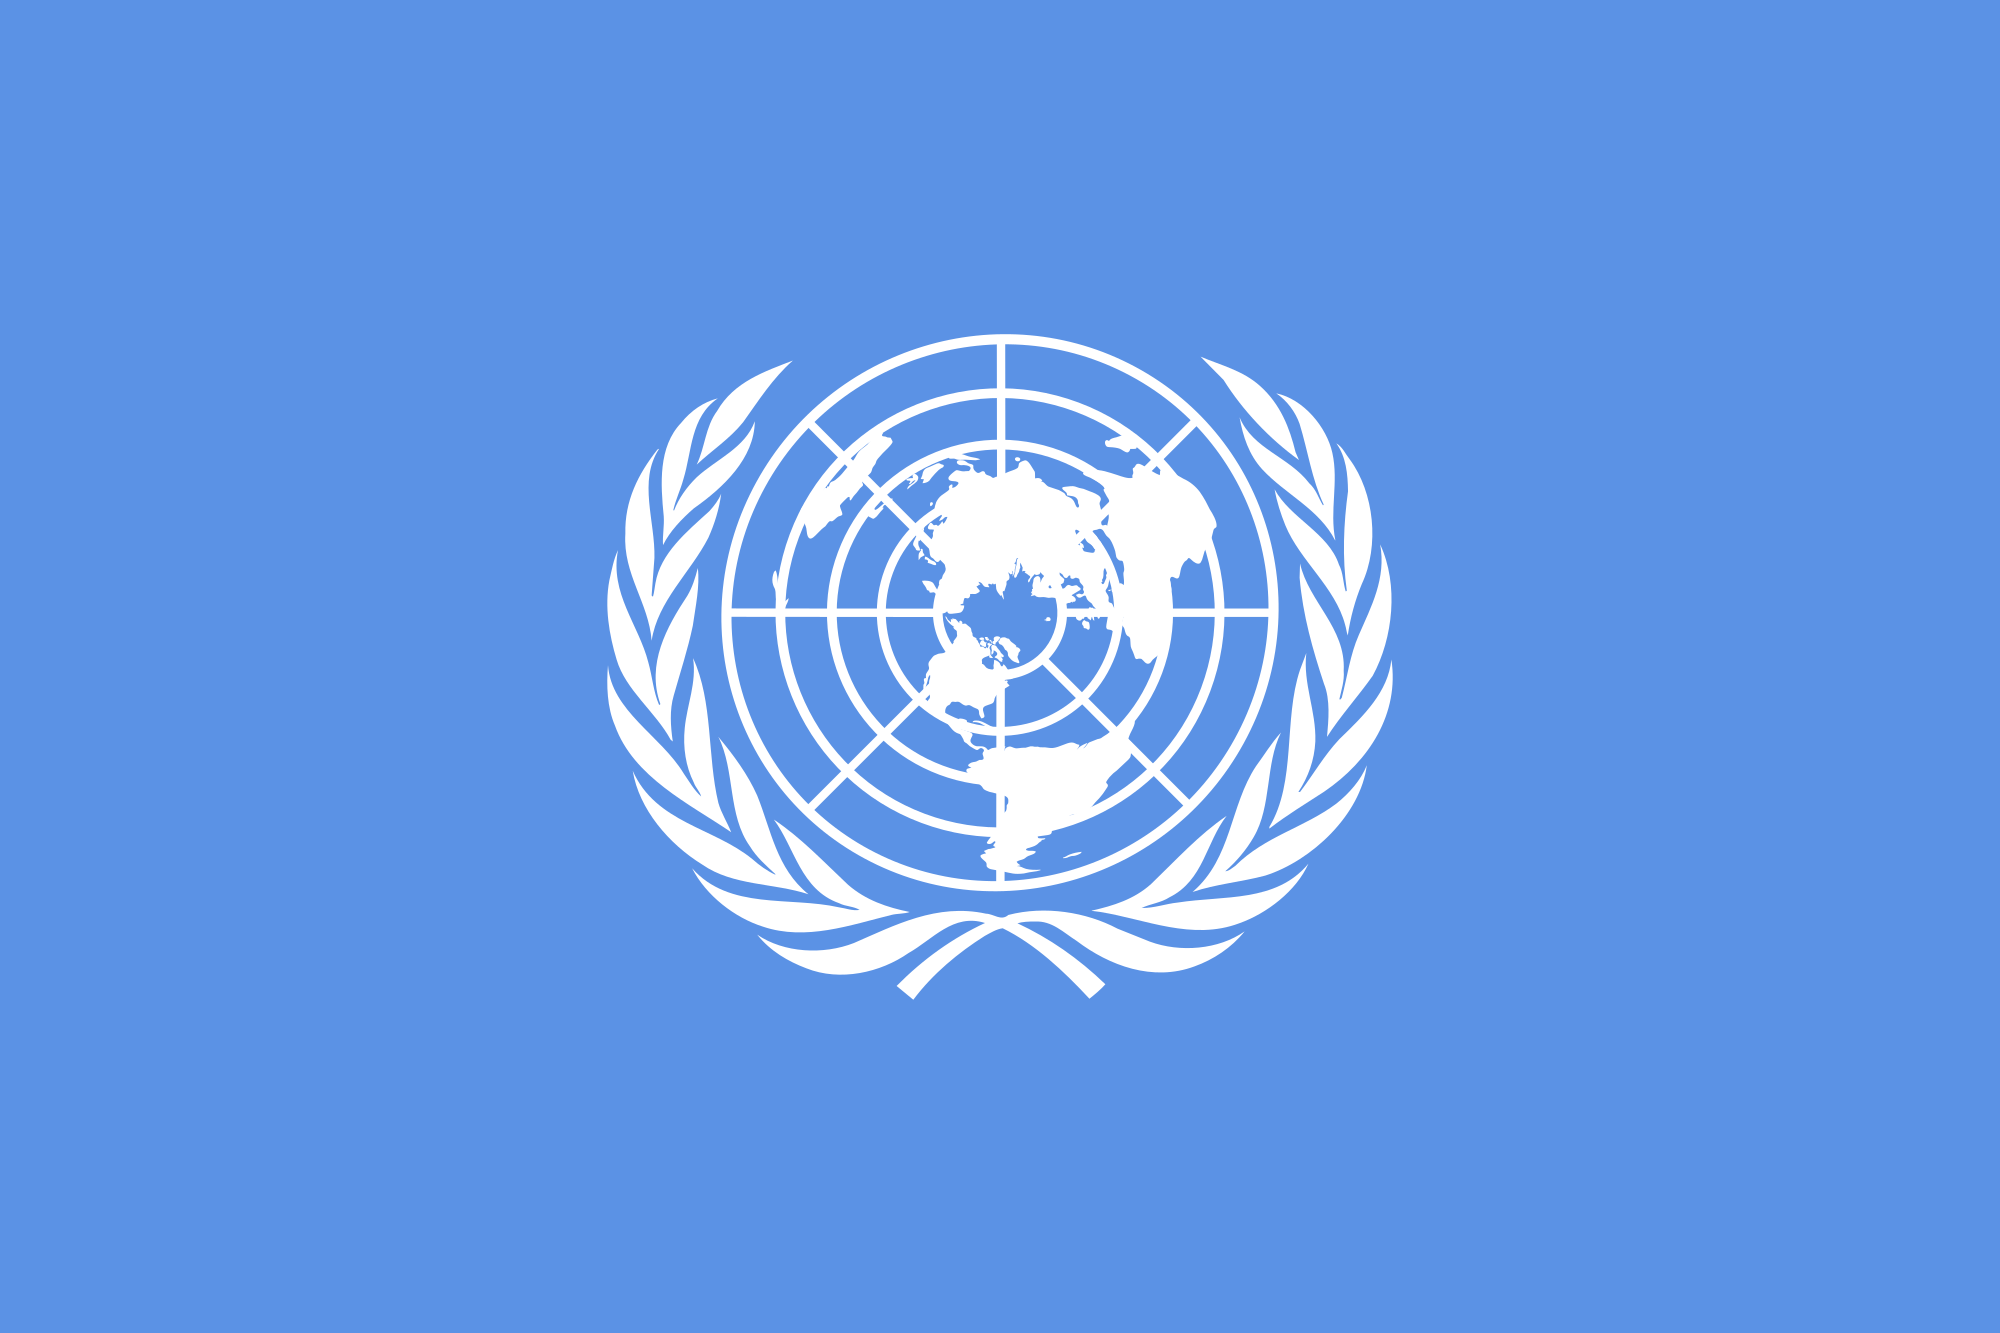 2000px-Flag_of_the_United_Nations_(1945-1947).svg.png